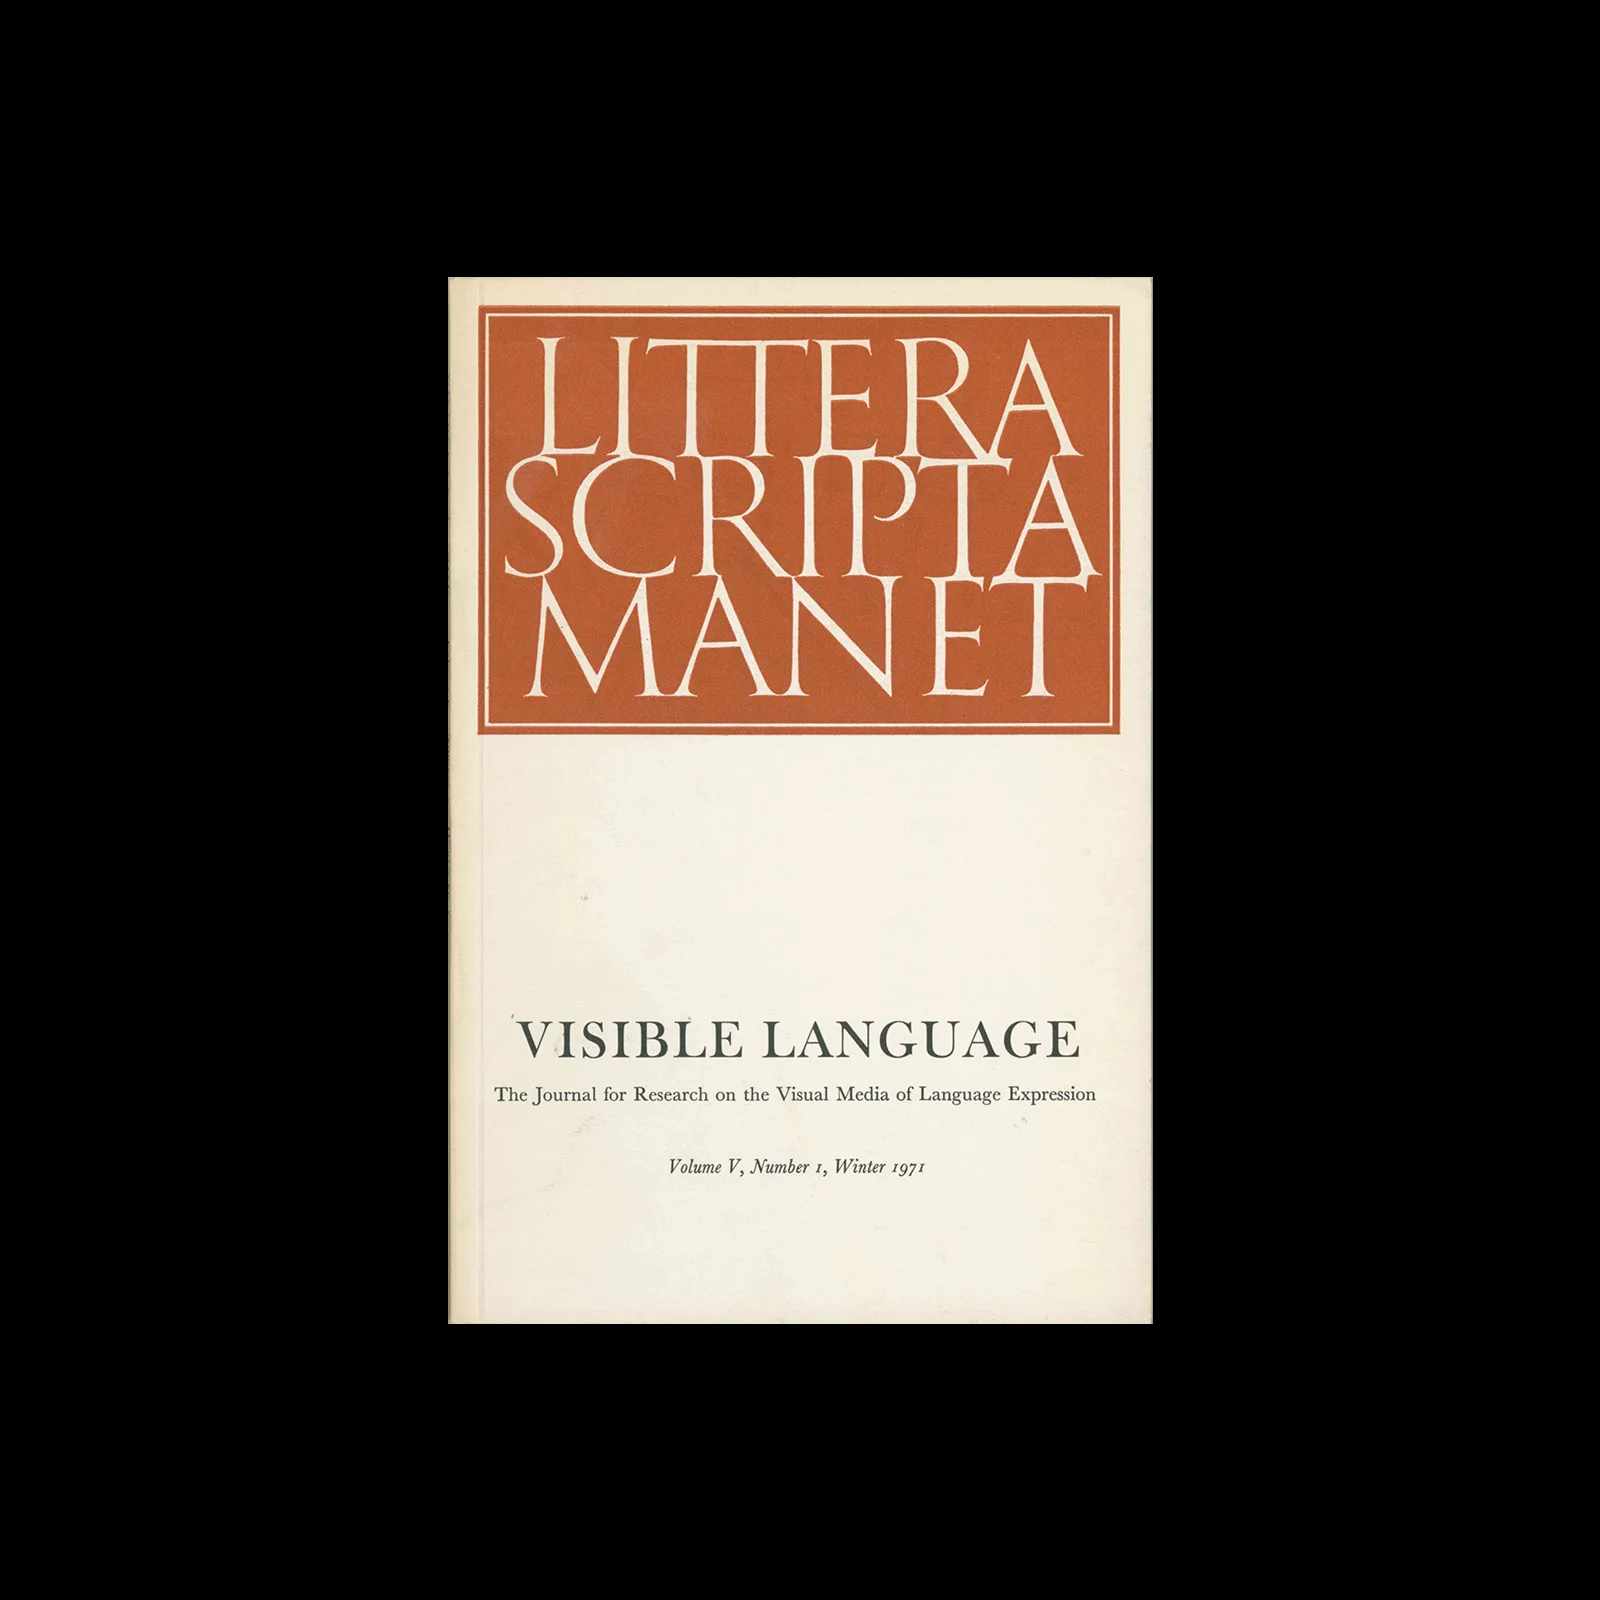 Visible Language, Vol 05, 01, Winter 1971. Cover design by Warren Chappell